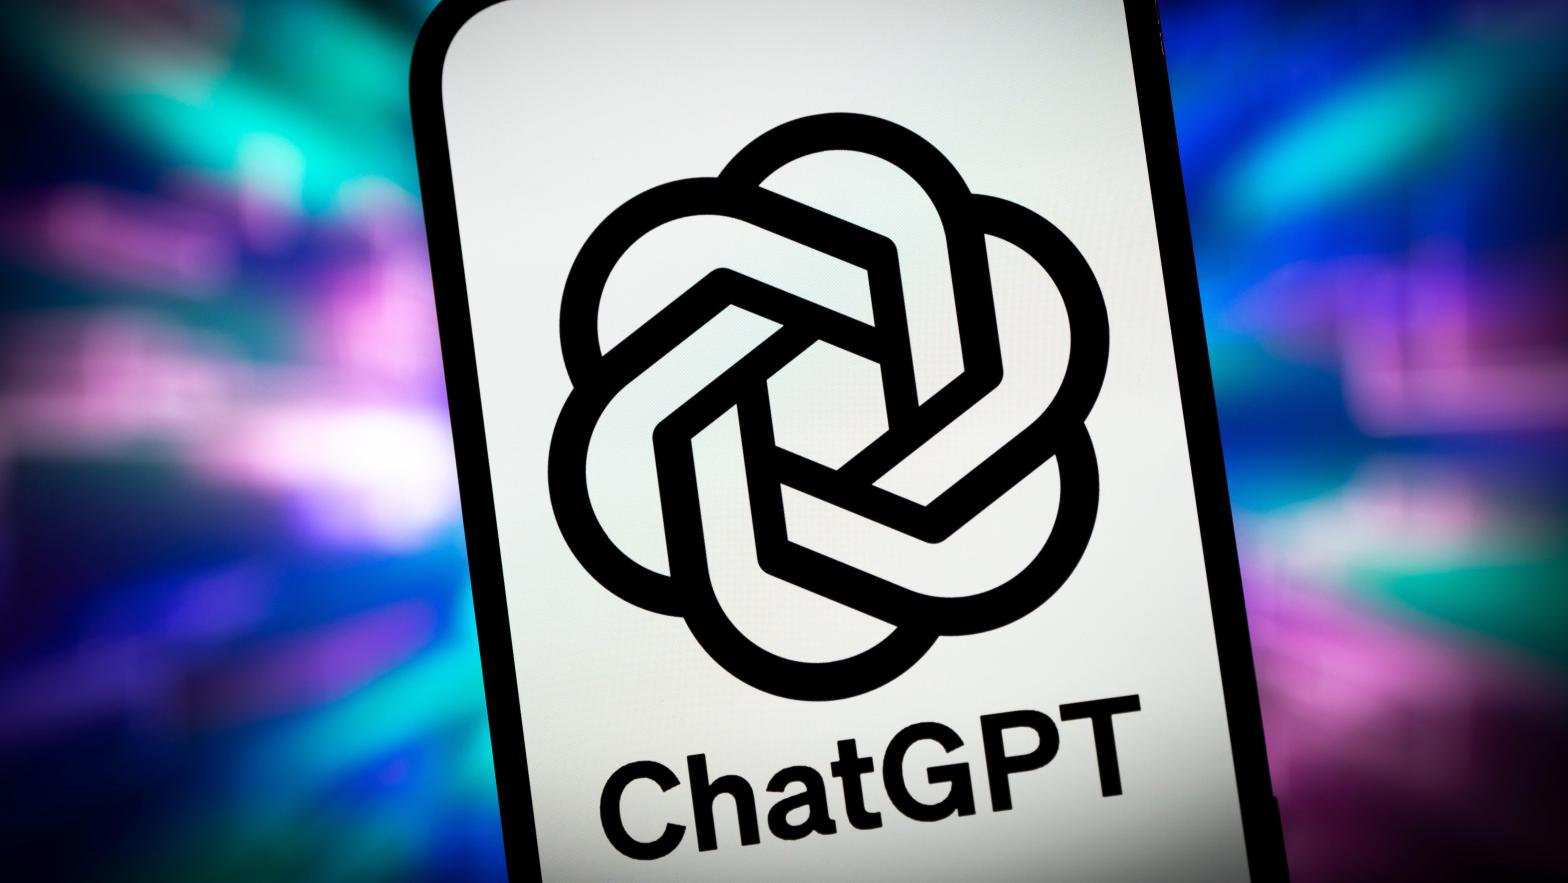 ChatGPT Answers Programming Questions Incorrectly More Than Half of the Time